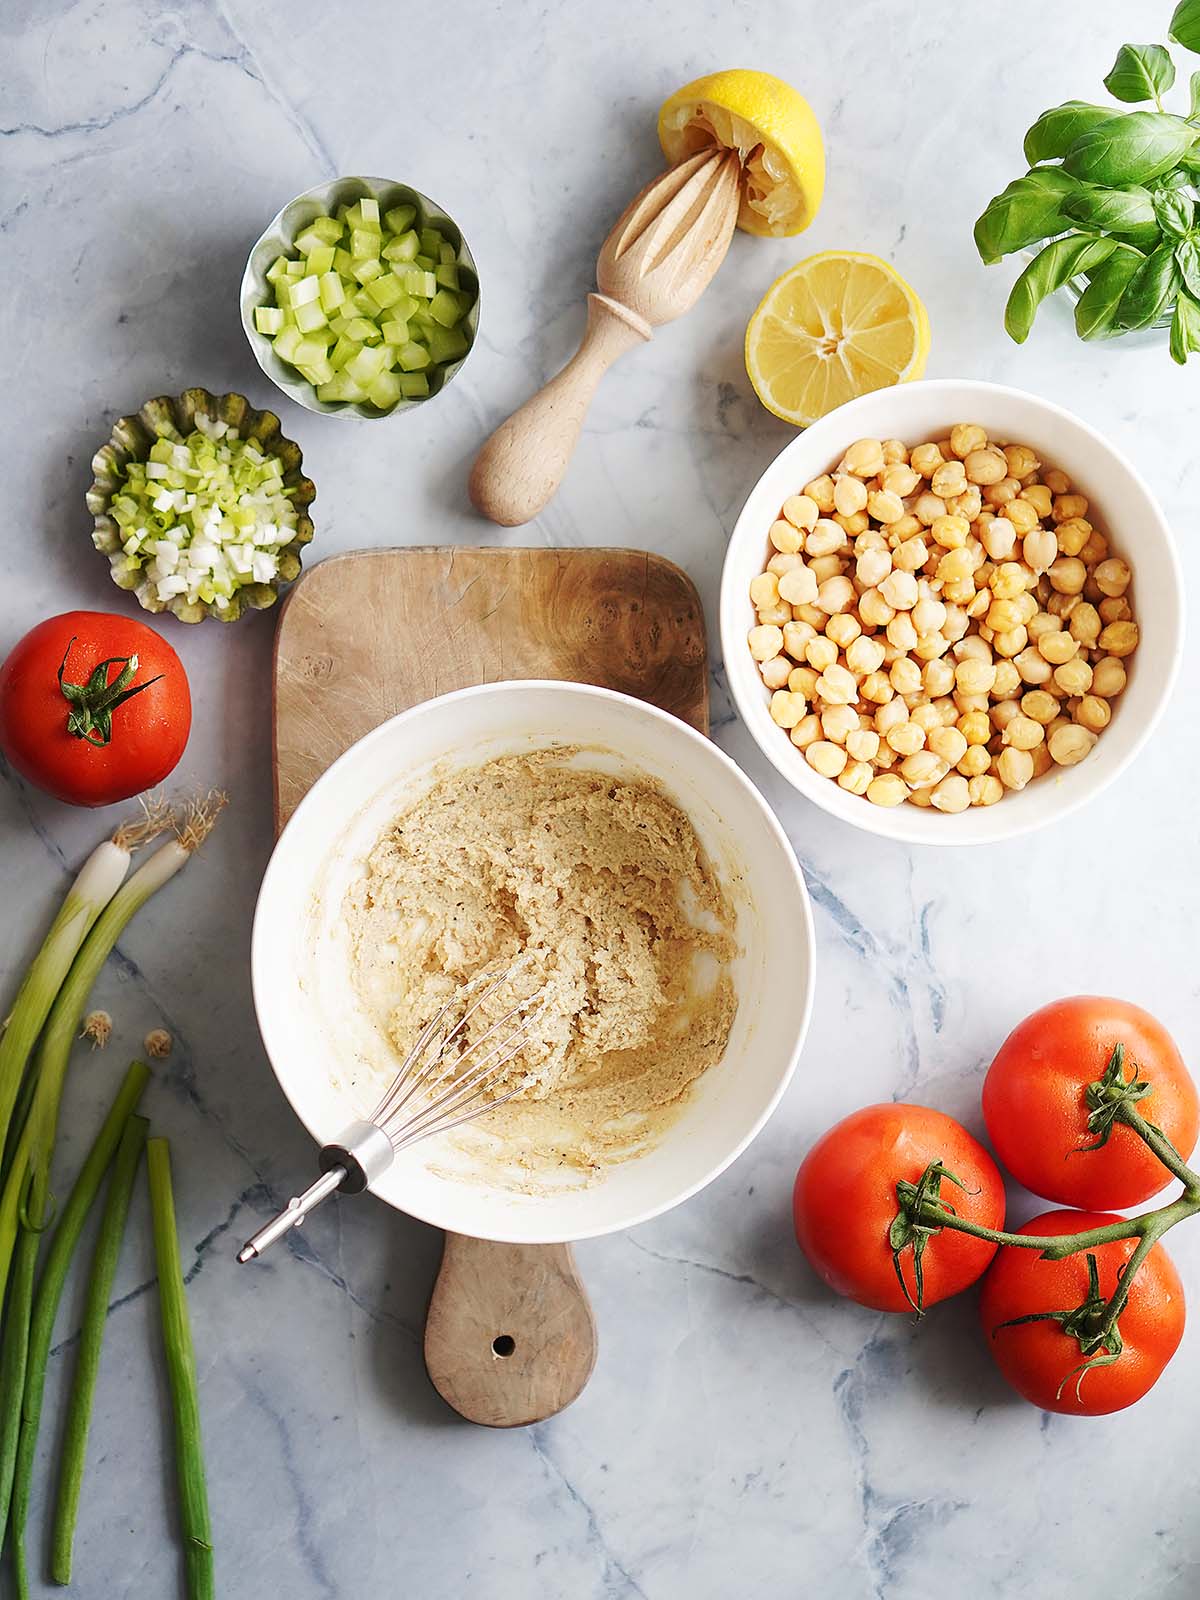 Making the chickpea salad with all ingredients on the side.